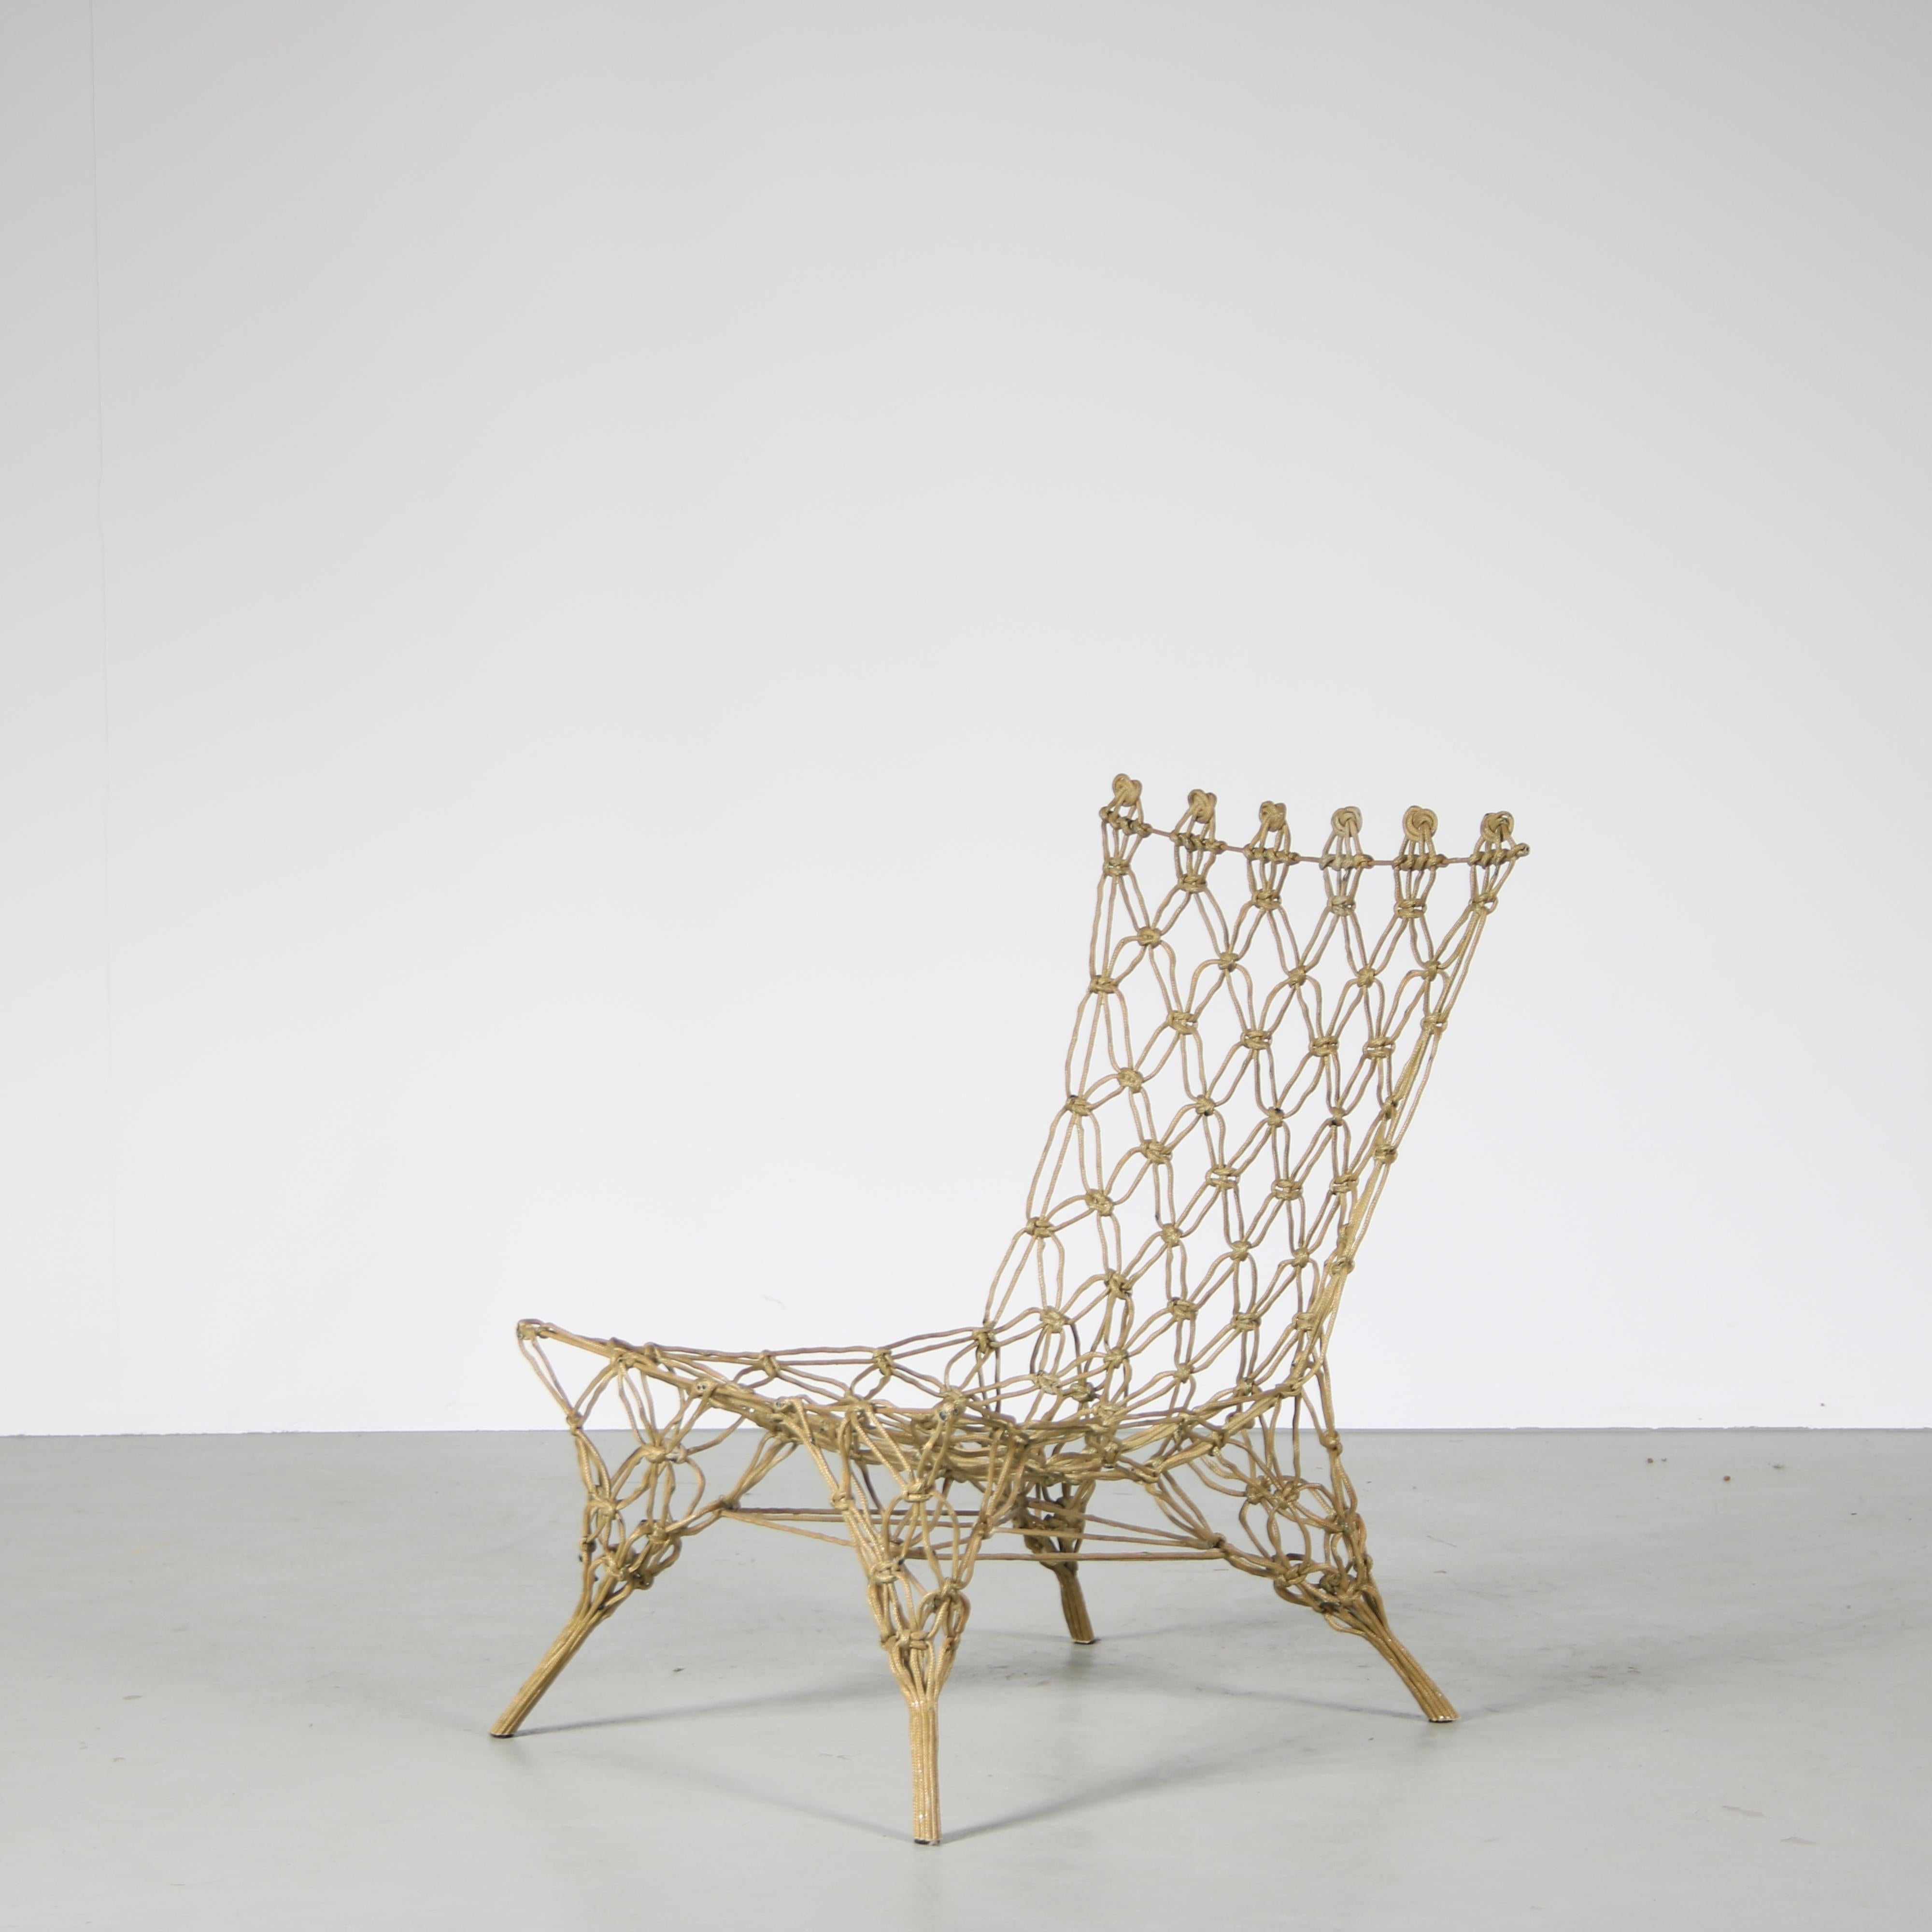 An eye-catching “Knotted” chair designed by Marcel Wander, manufactured by Droog Design in the Netherlands around 1990.

Made of high quality braided cord around a carbon fibre base, this unique piece has a truly outstanding appearence that will